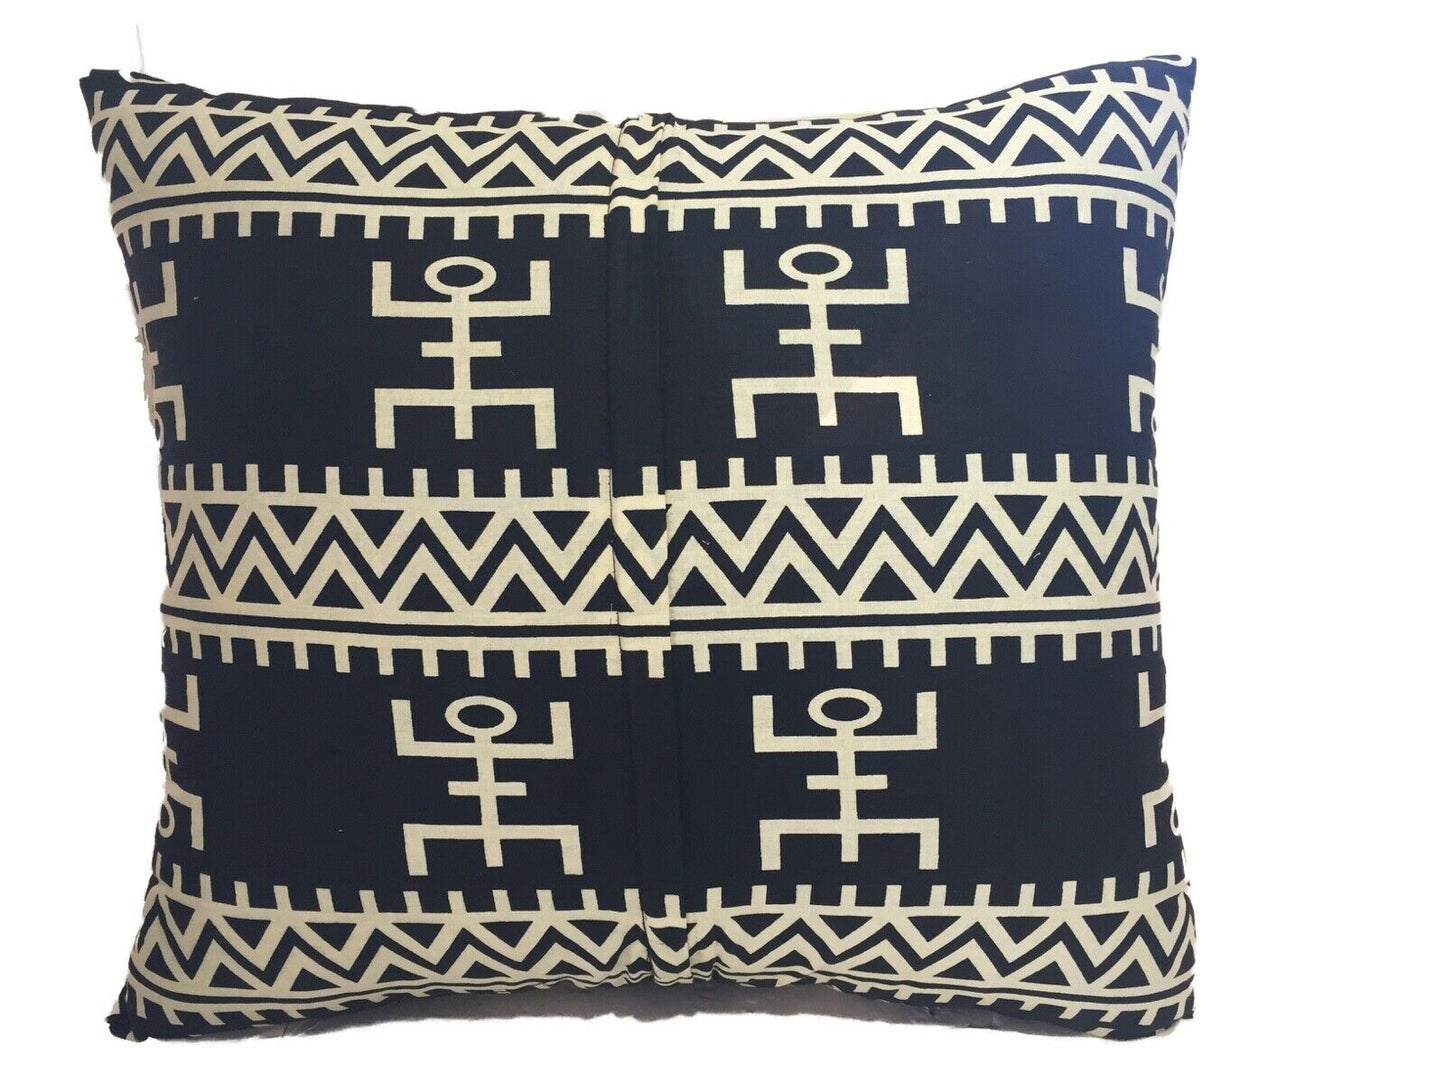 #2069 African Custom Made Black and White Kente Cloth Pillow 20.5" by 19"